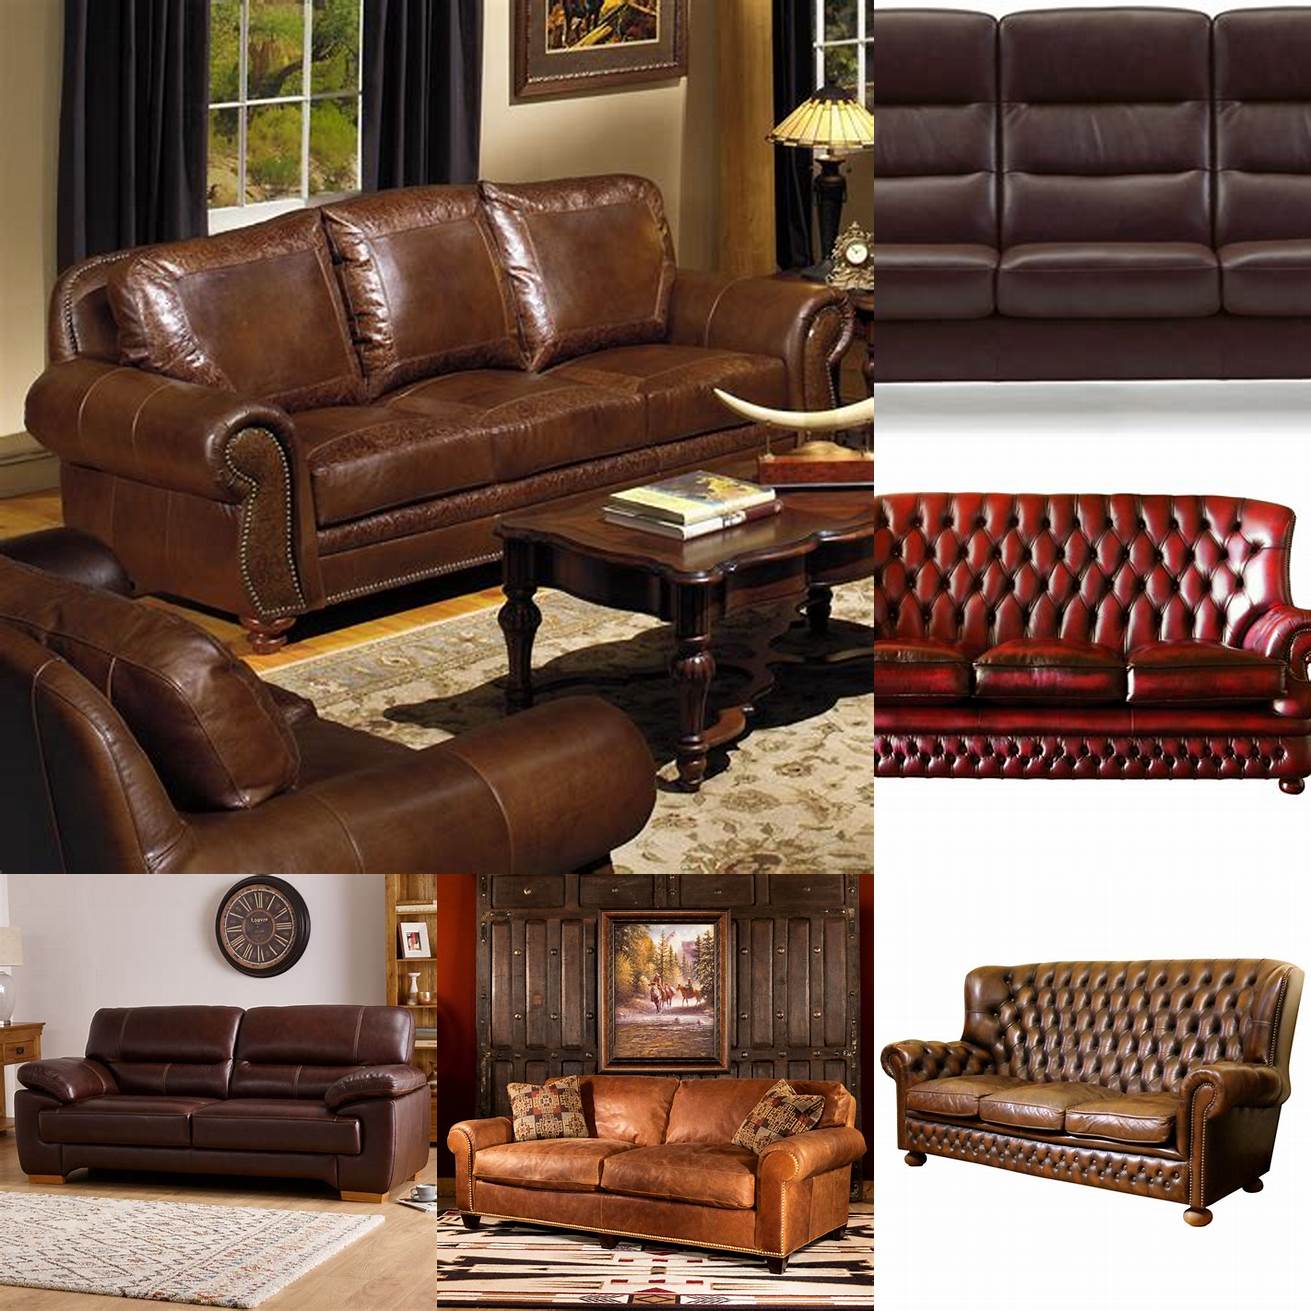 Leather Leather high back sofas are durable stylish and easy to clean They come in various colors from classic black and brown to bold red and blue